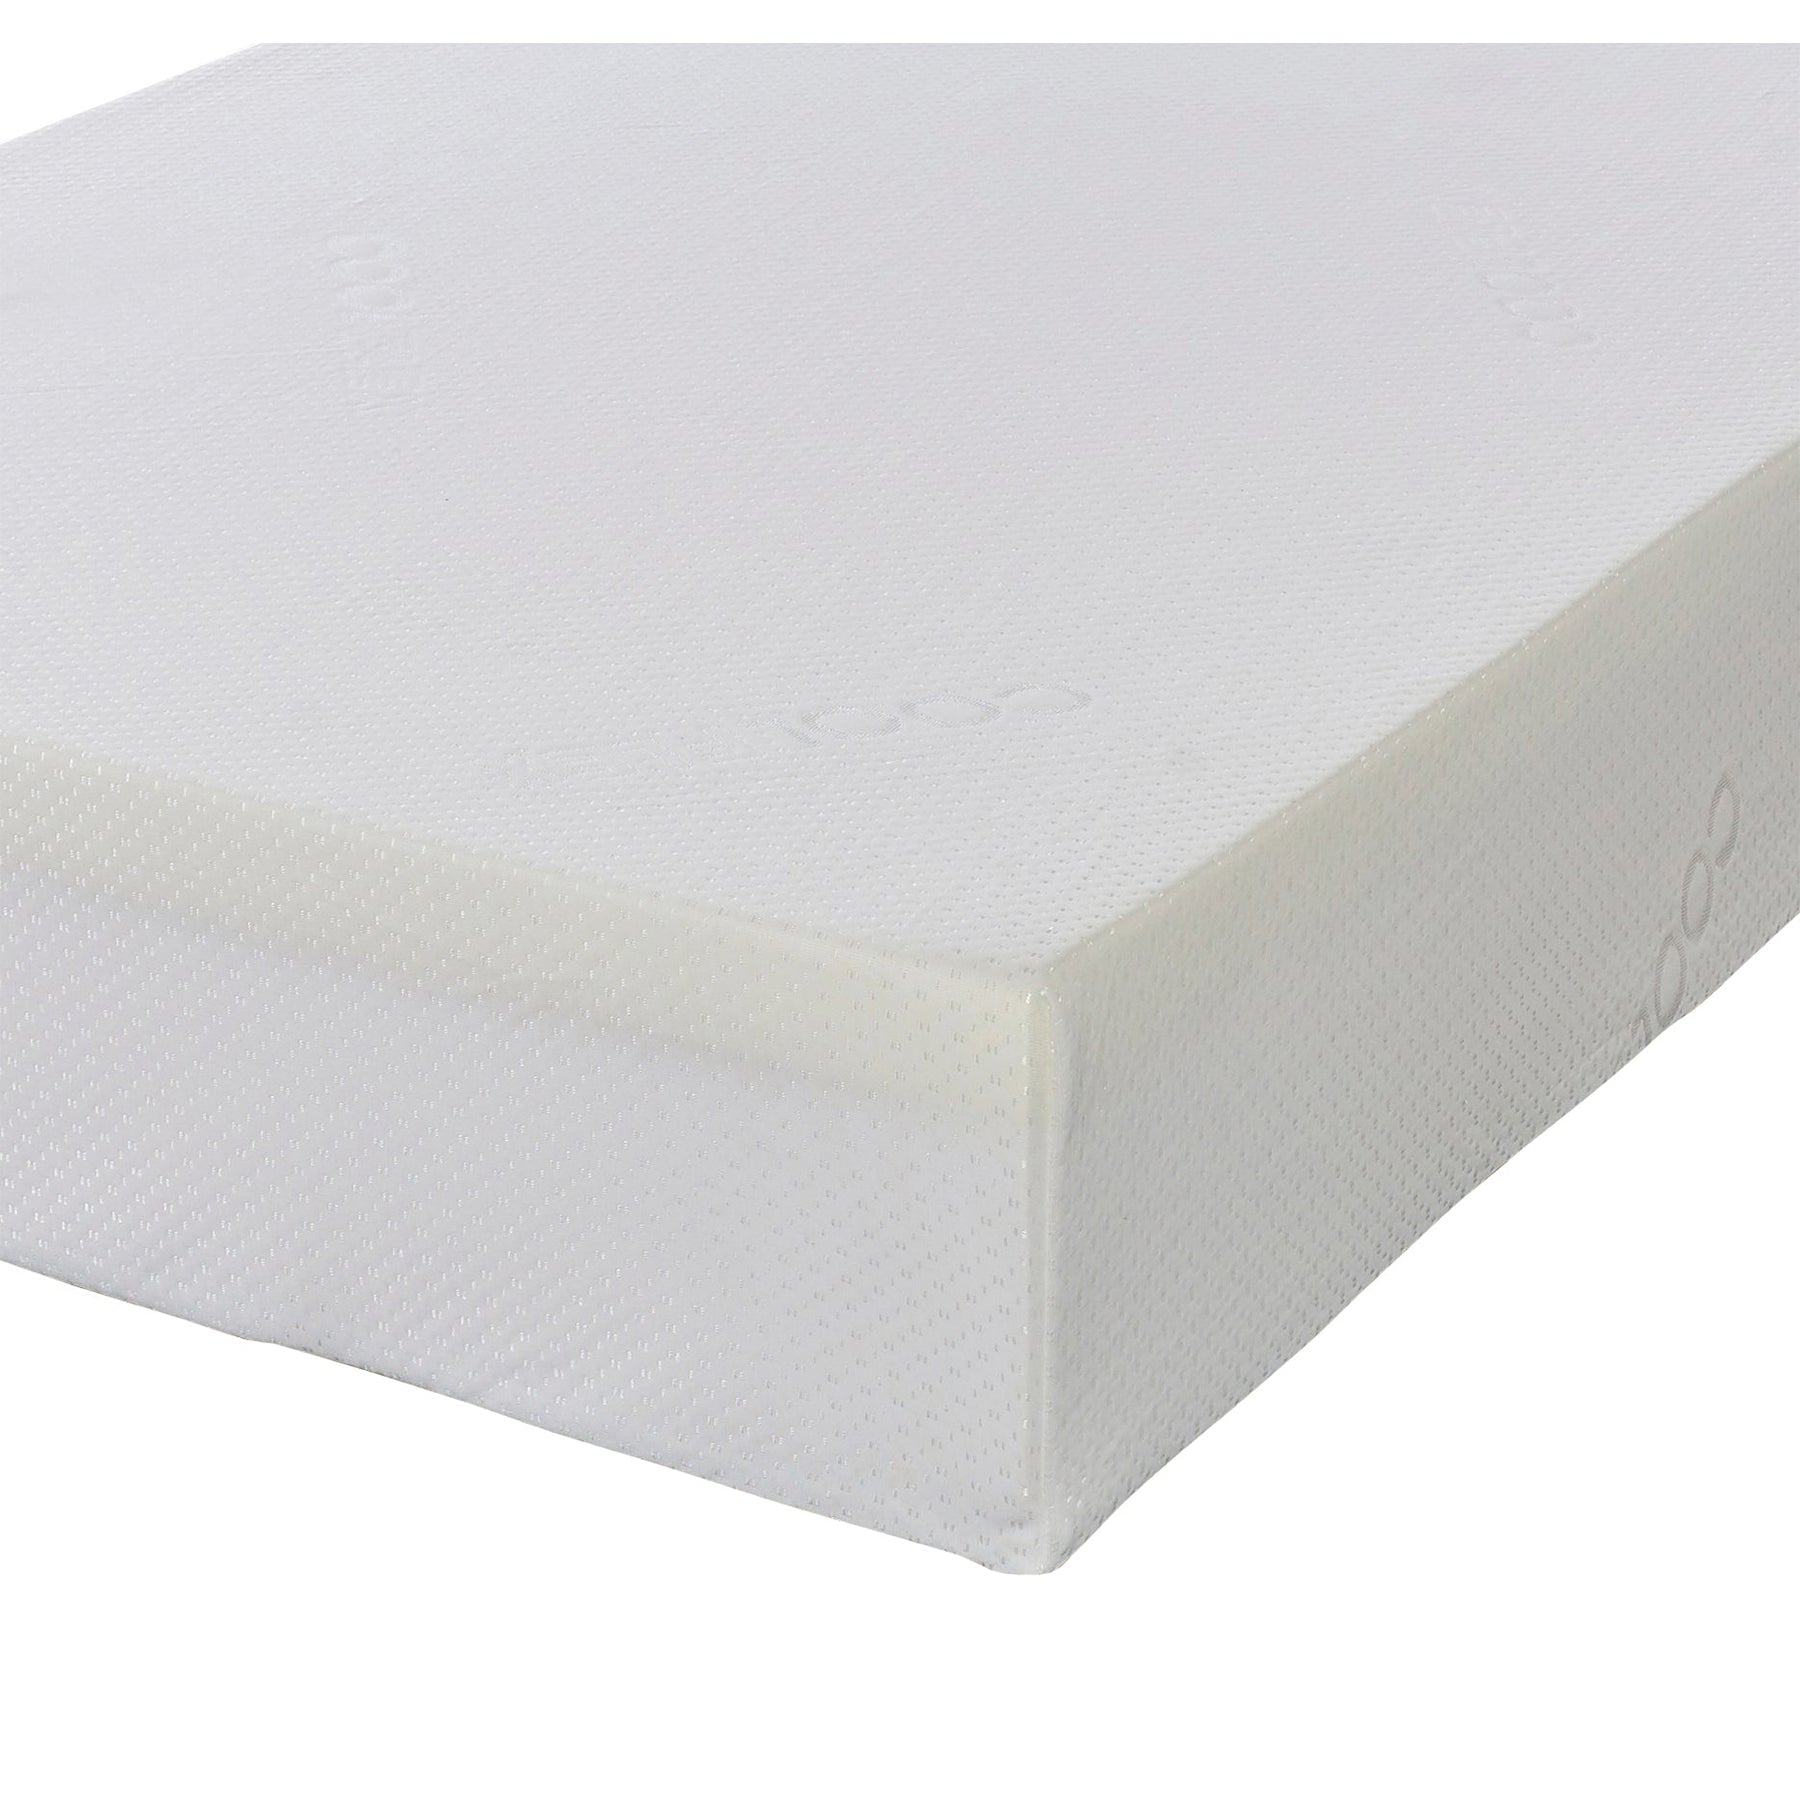 Starlight Beds™ | Orthopaedic All Reflex Foam with Cool Touch Zip Cover Mattress